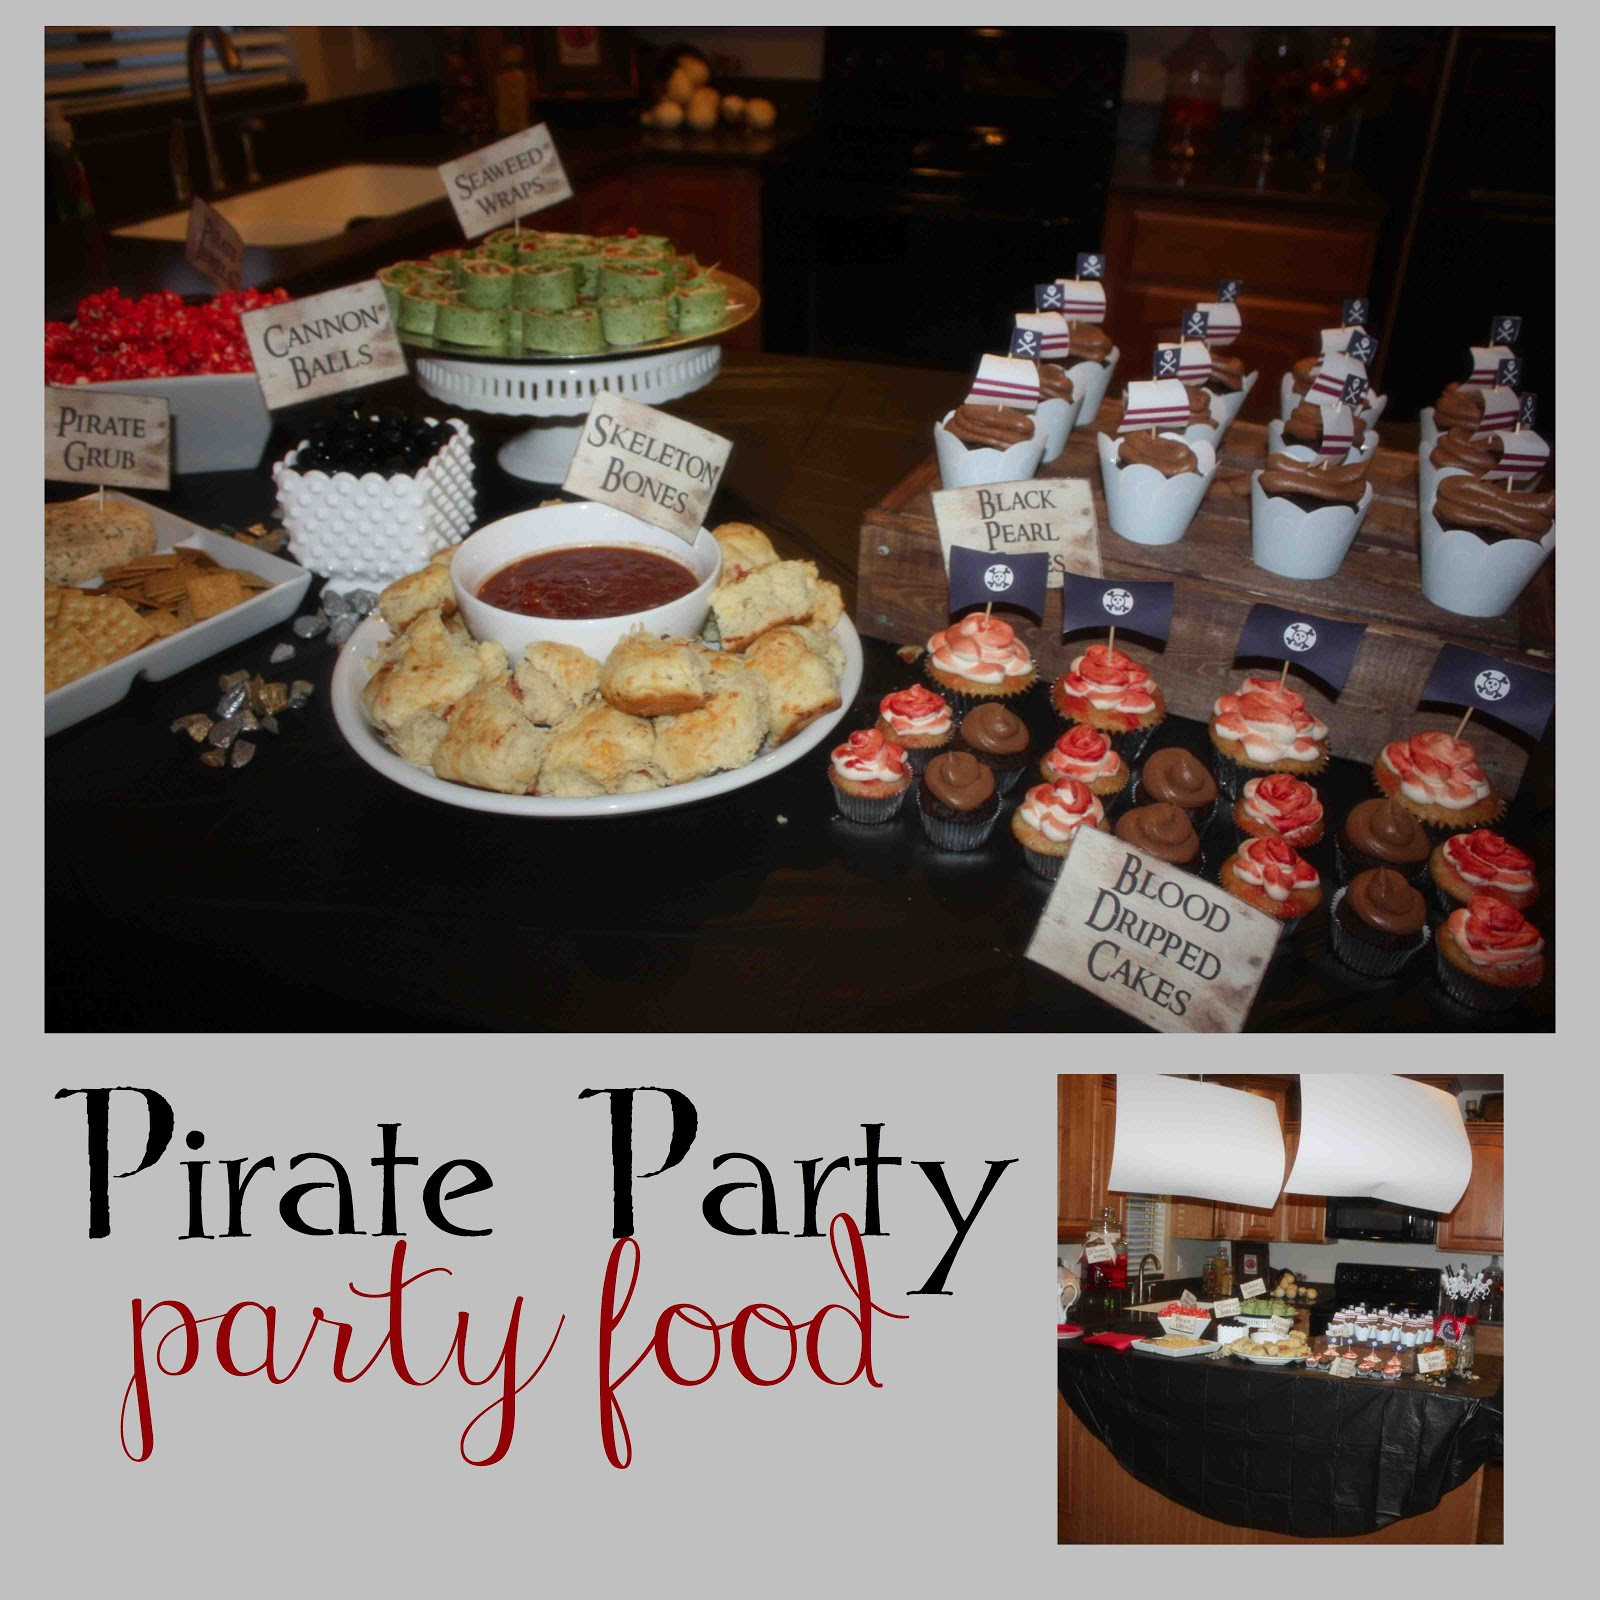 Pirates Party Food Ideas
 just Sweet and Simple Pirate Party